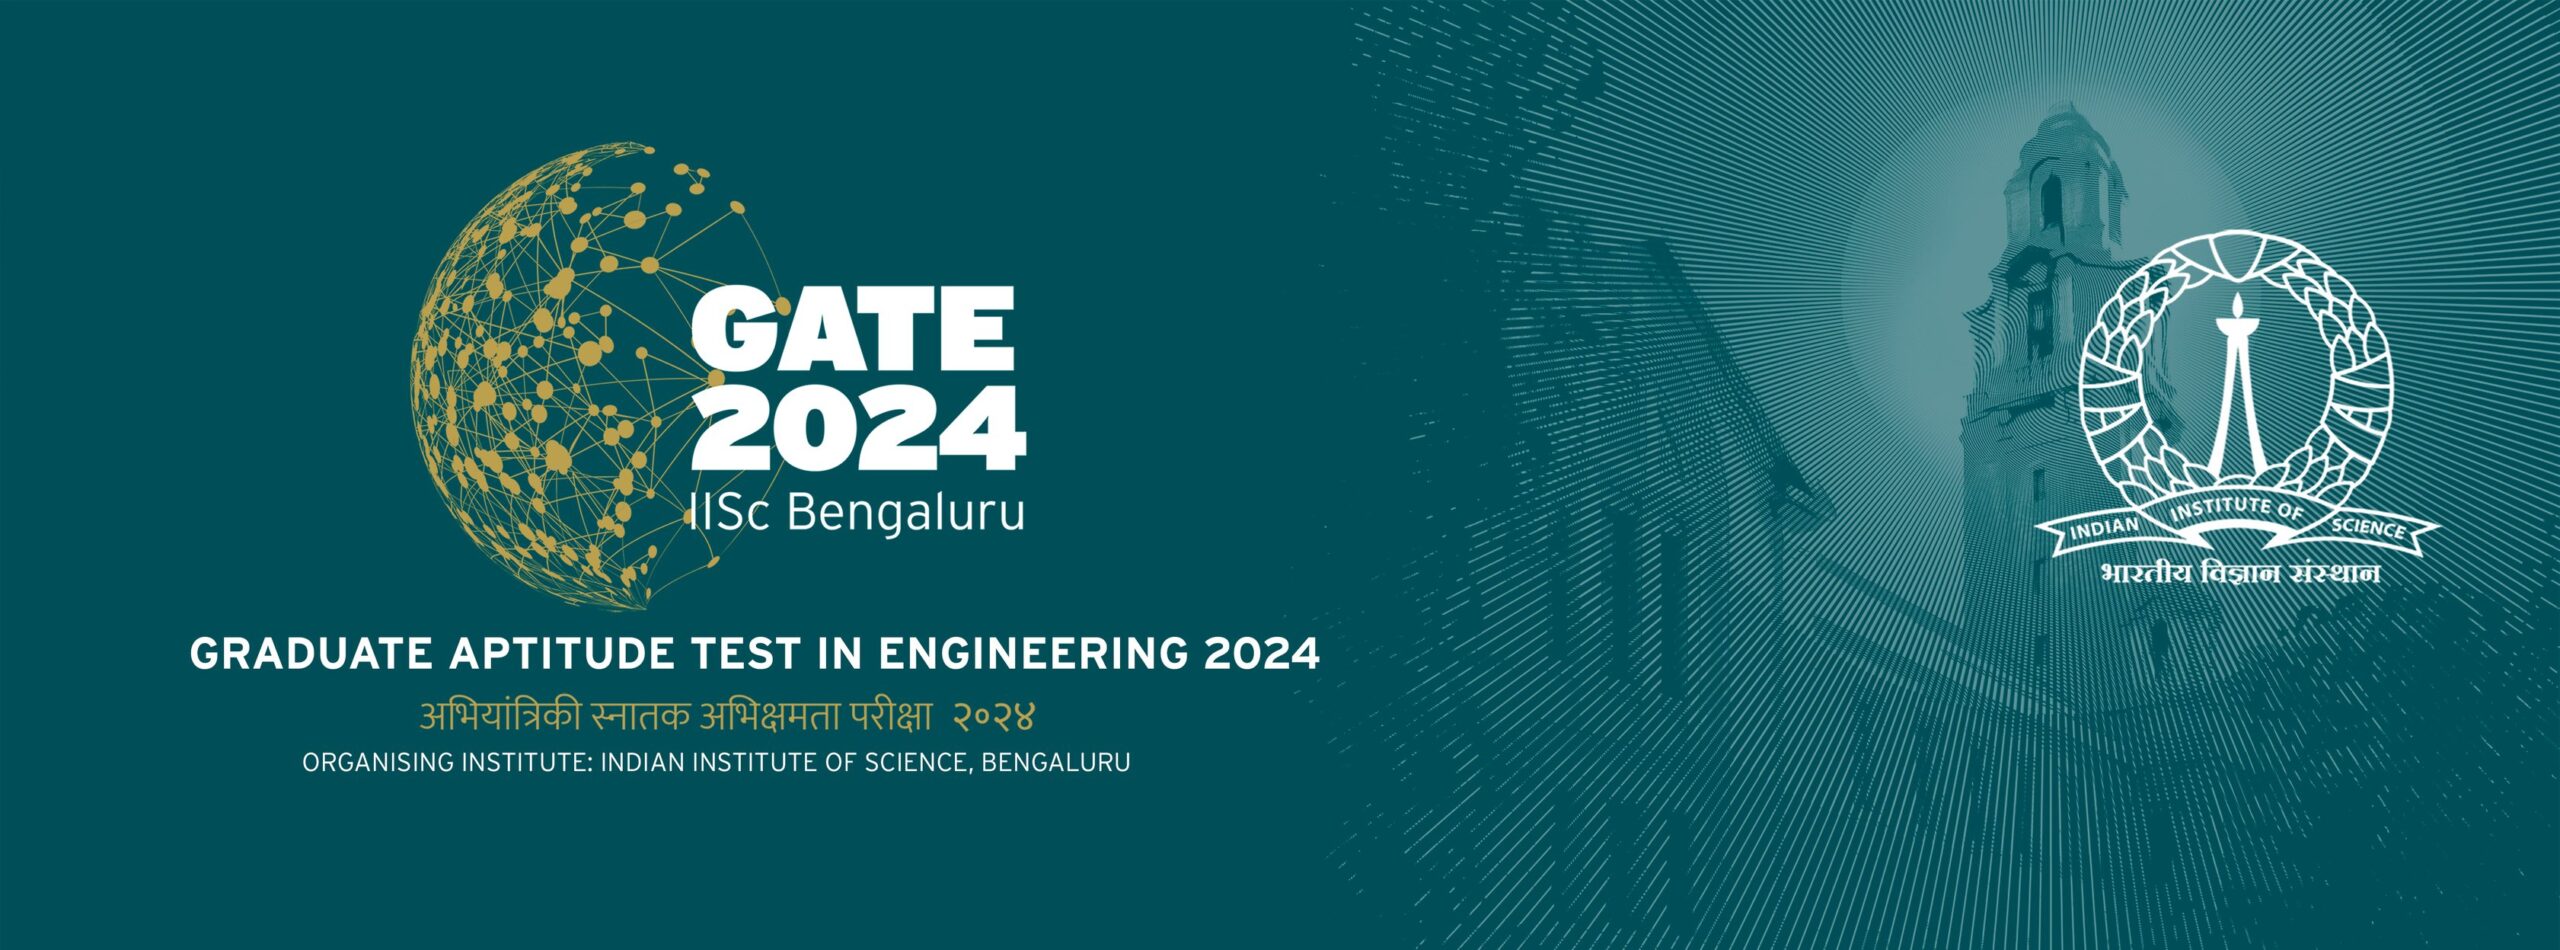 GATE 2024 to be conducted for 30 papers, Data Science and AI new